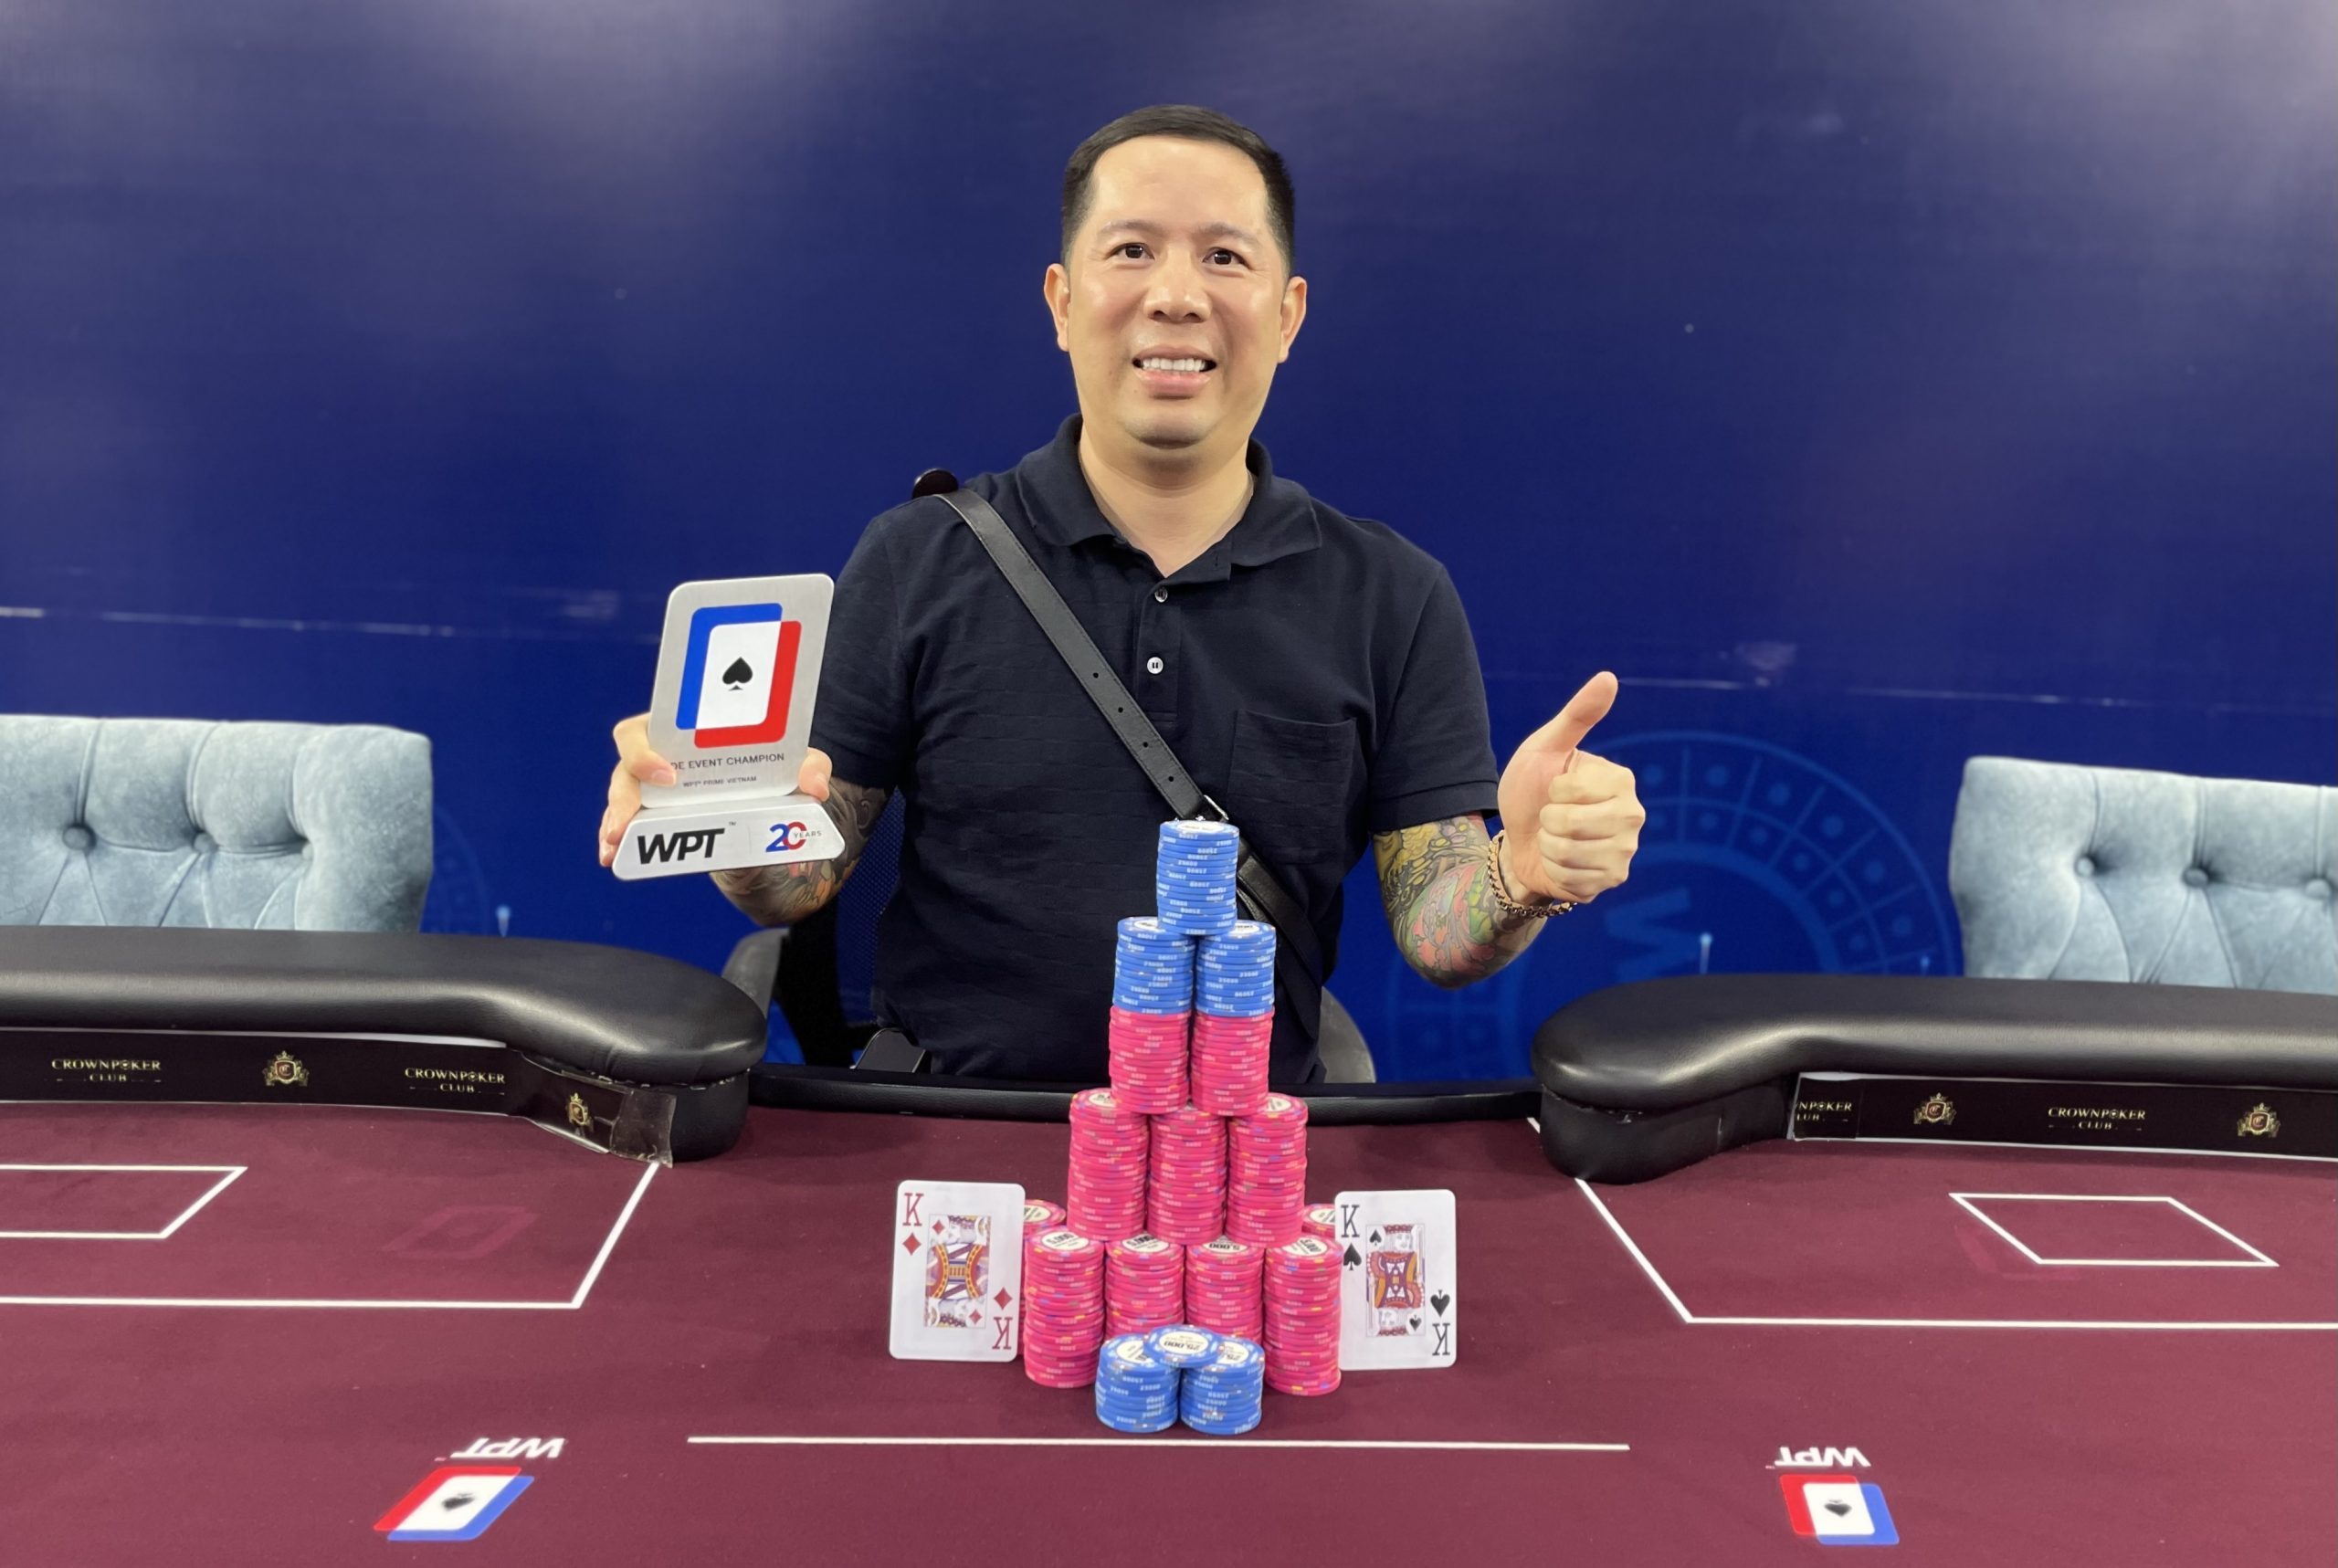 WPT Prime Vietnam: Overjoyed champions on opening day: Quan Trung Nguyen, Vinh Nguyen, Thanh Hung Tran; Opener Day 1A sees 14 advance